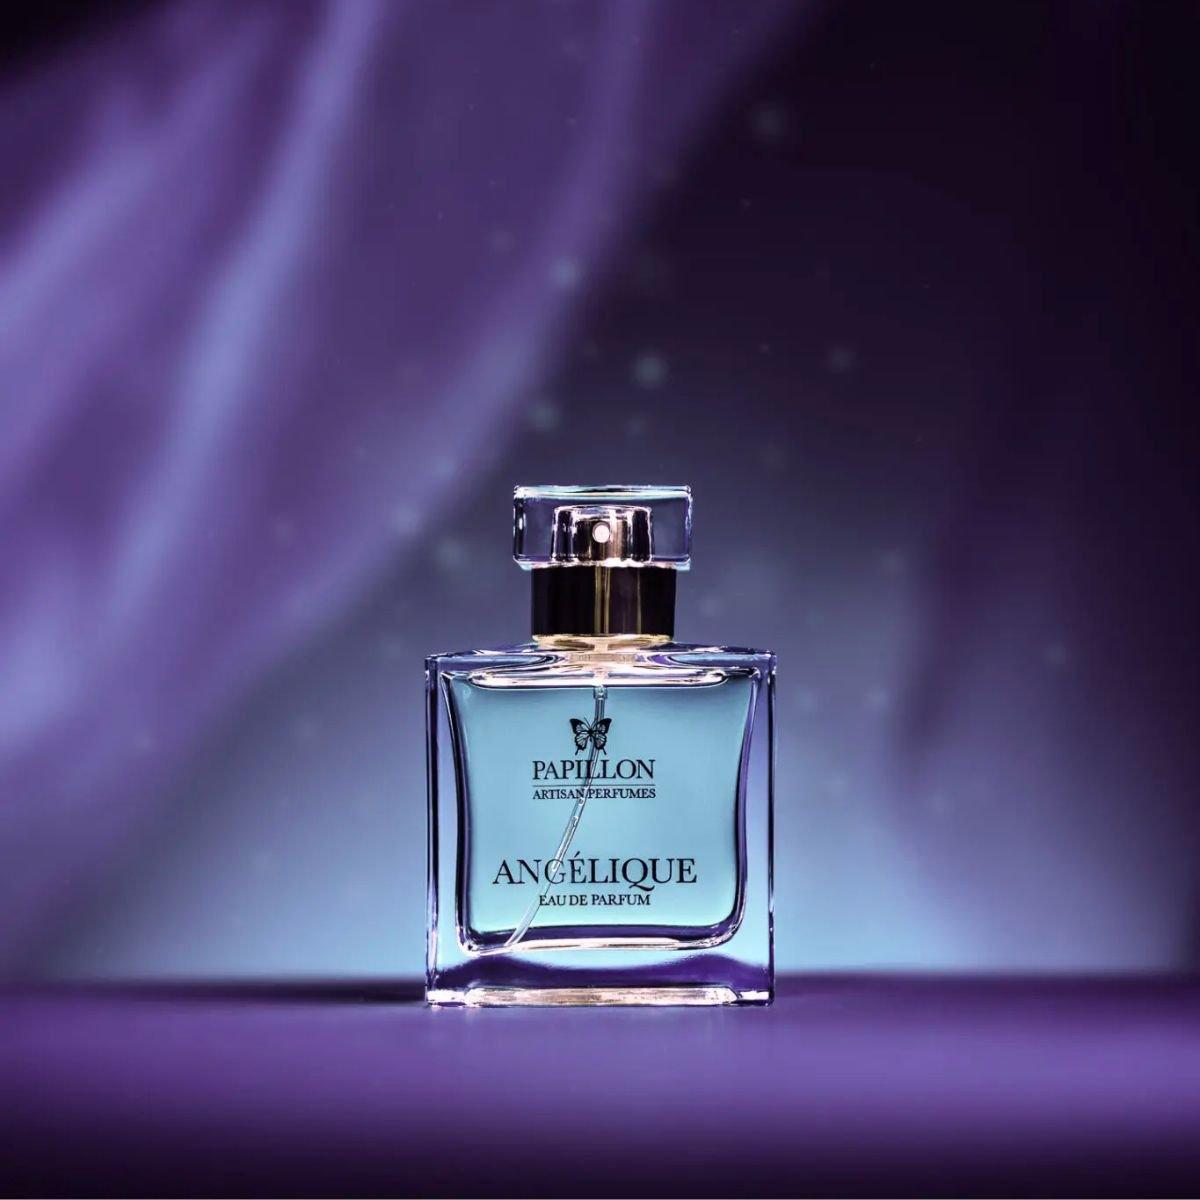 Image of the perfume Angelique by the brand Papillon